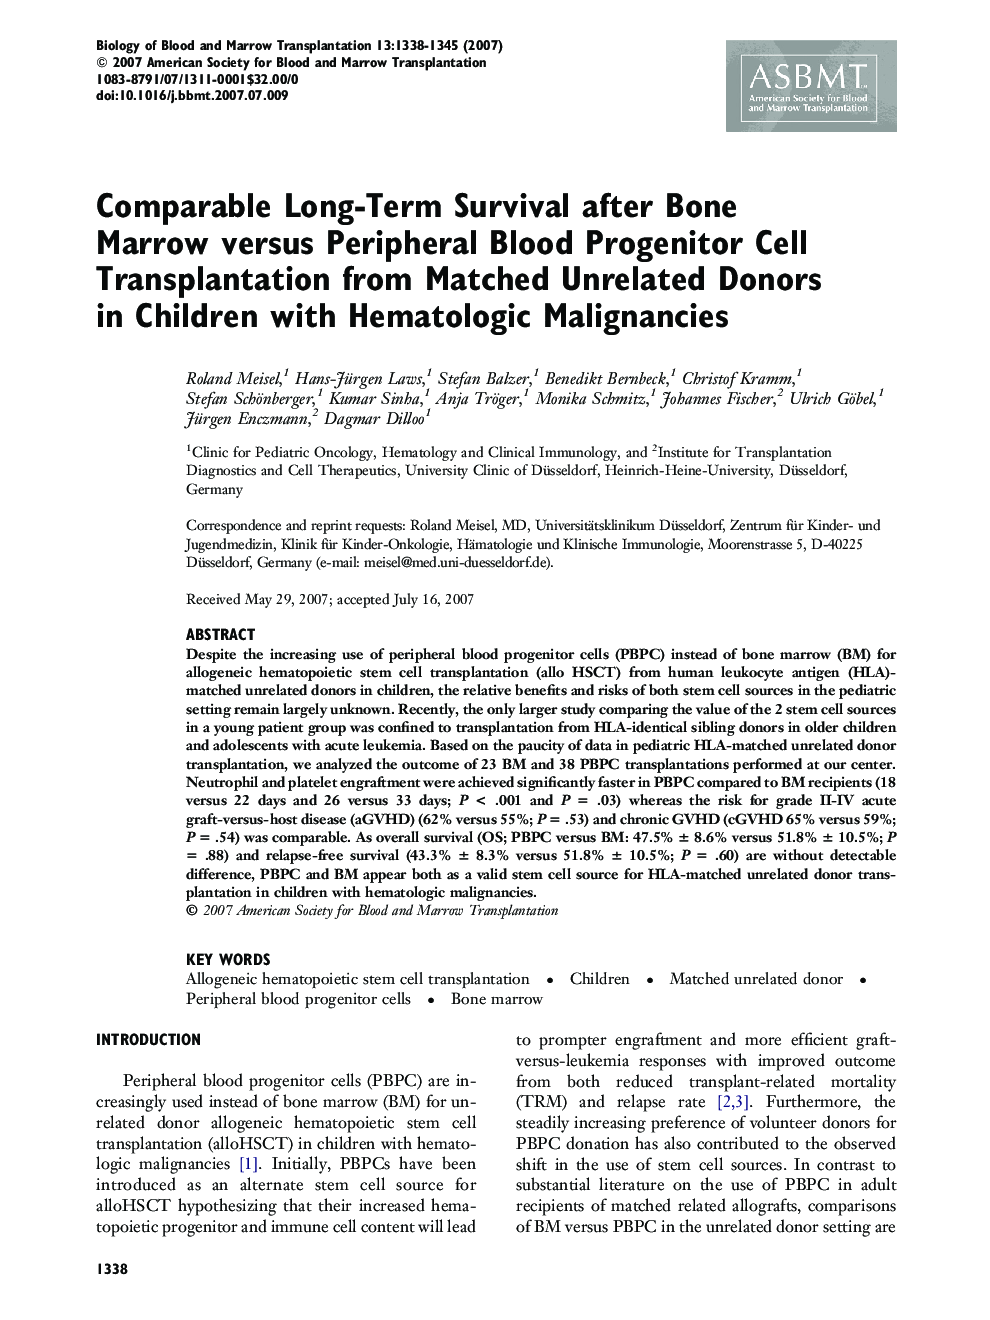 Comparable Long-Term Survival after Bone Marrow versus Peripheral Blood Progenitor Cell Transplantation from Matched Unrelated Donors in Children with Hematologic Malignancies